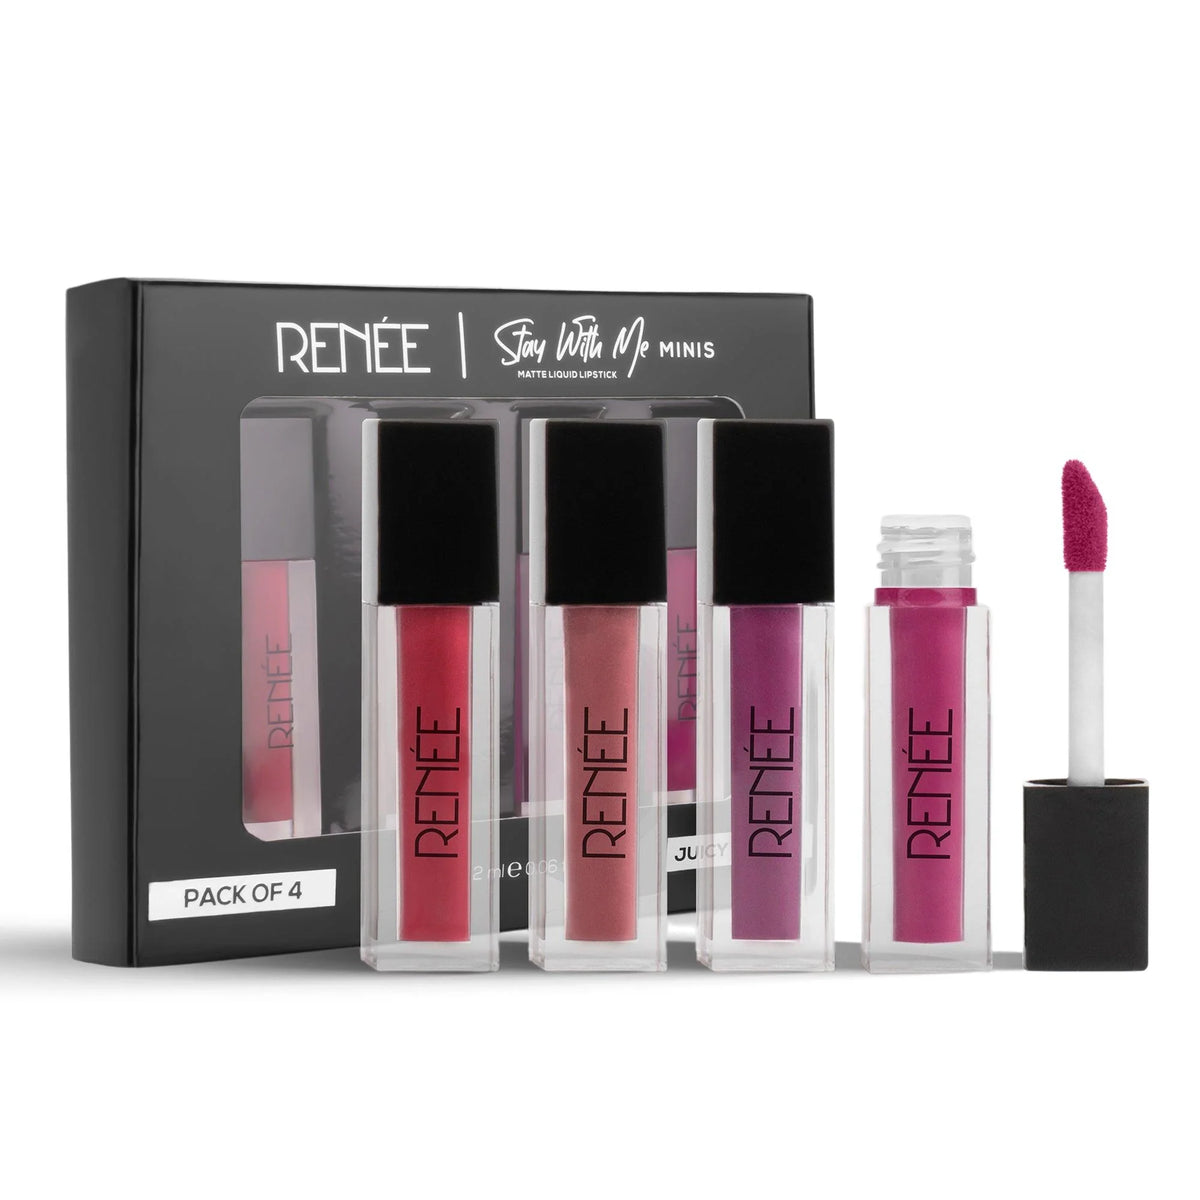 RENEE Stay With Me Minis Matte Liquid Lipsticks Combo Of 4, 2ml Each